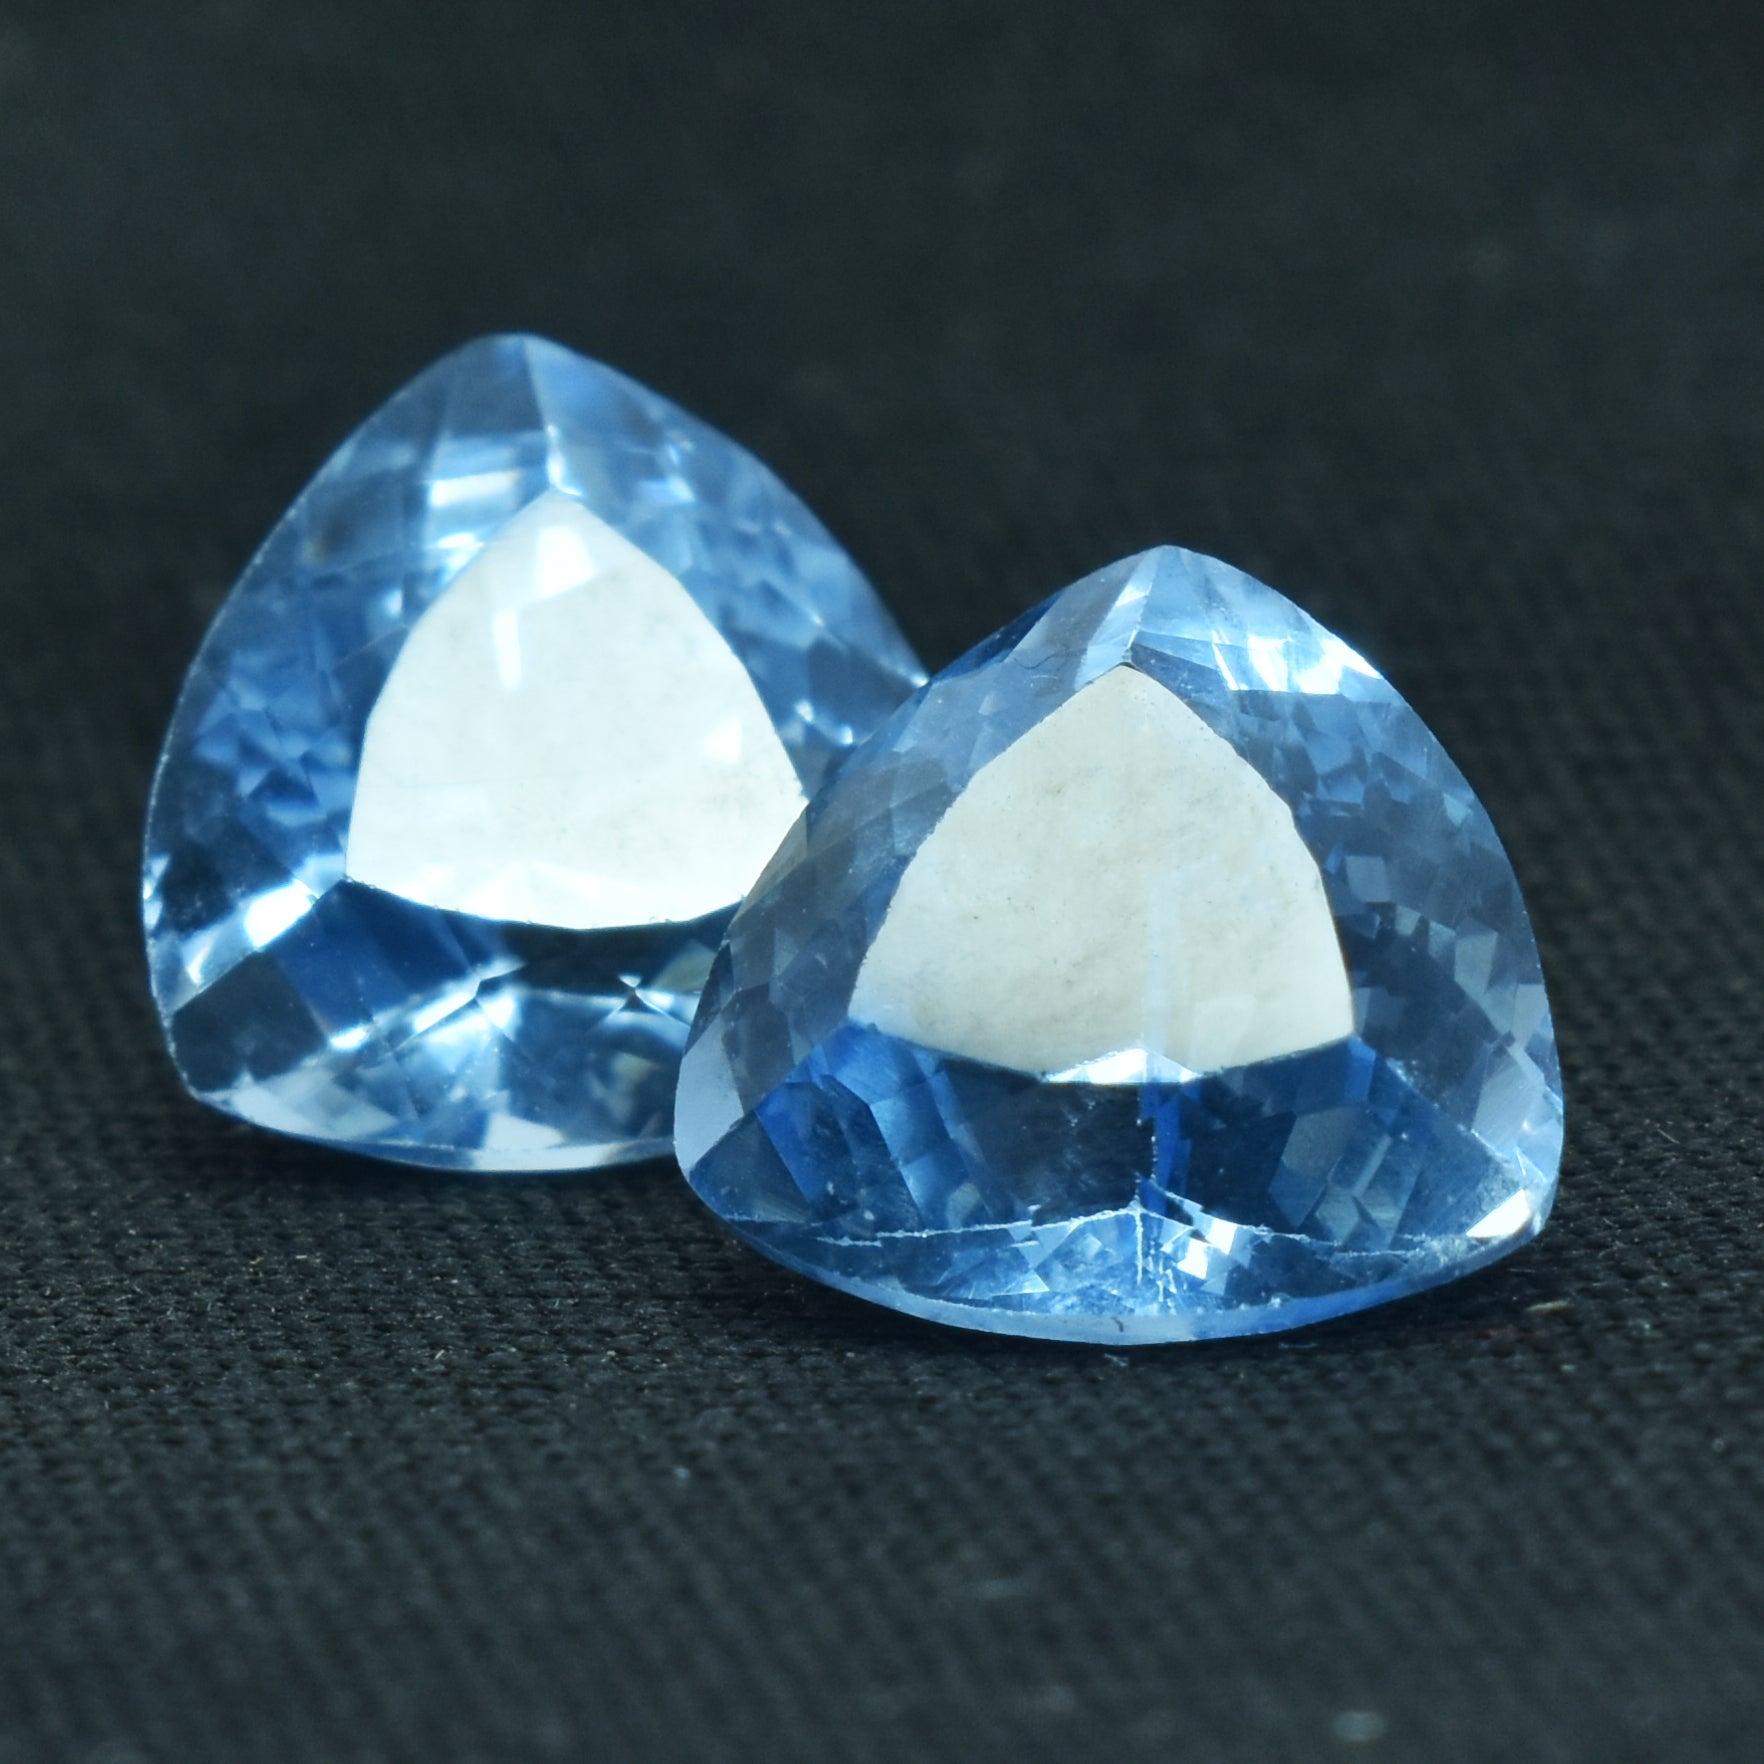 BEST SALE !! Beautiful Lite Blue Sapphire 18.89 Carat Pair Of Trillion Shape Natural Blue Sapphire CERTIFIED Loose Gemstone Prefect Size For Making Ring And Earrings Sapphire From Sri Lanka Gemstone Gift For Her